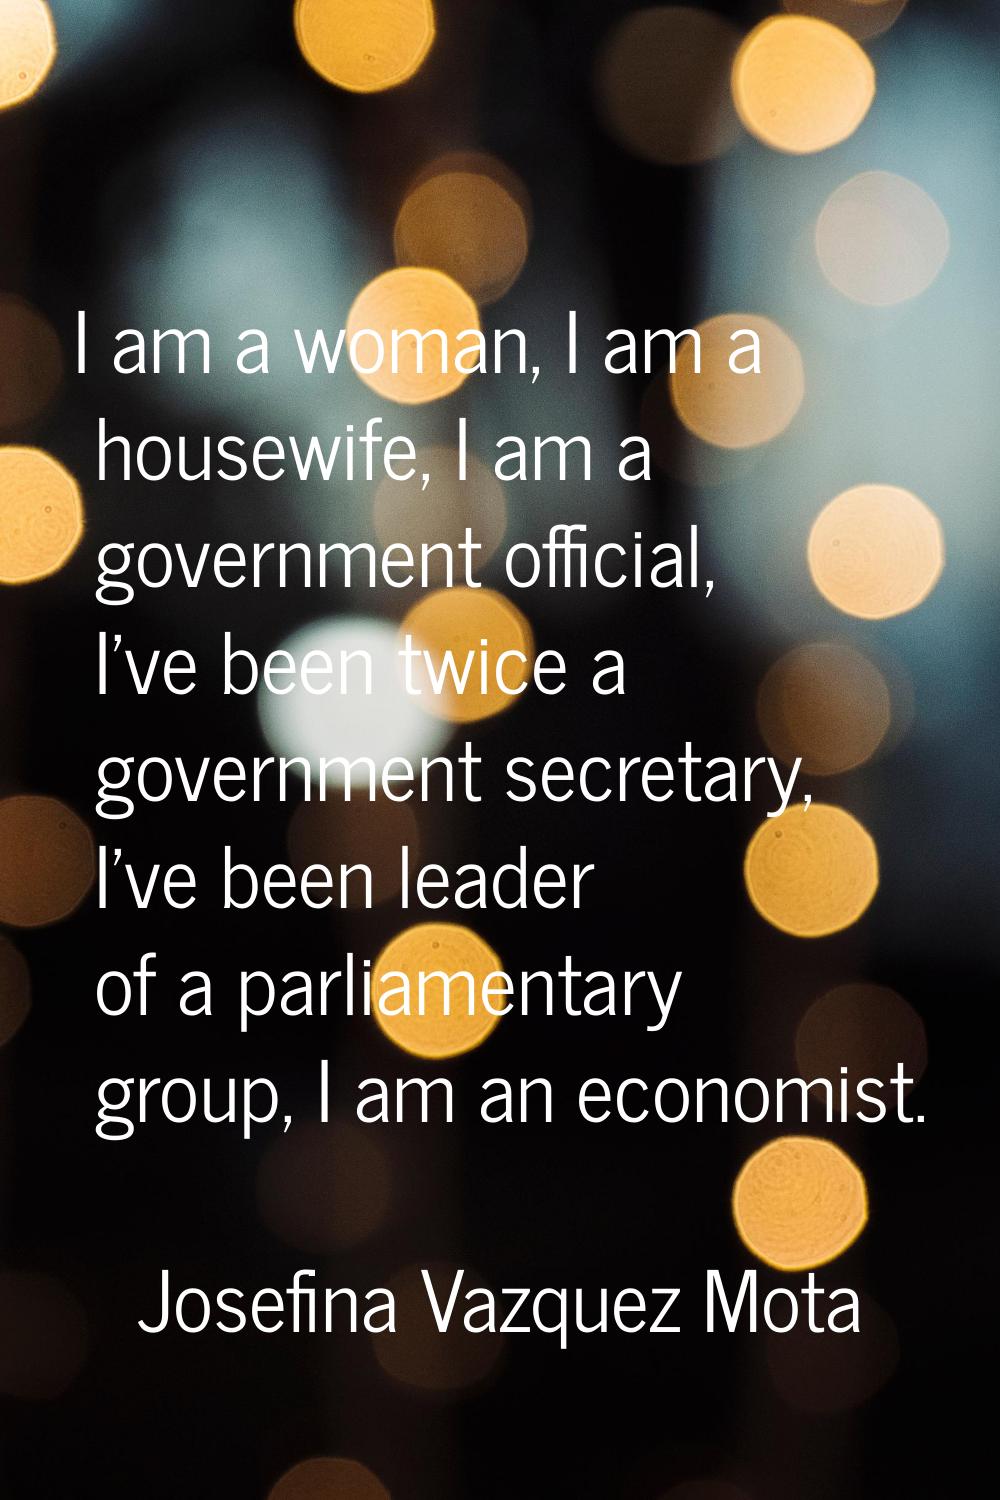 I am a woman, I am a housewife, I am a government official, I've been twice a government secretary,